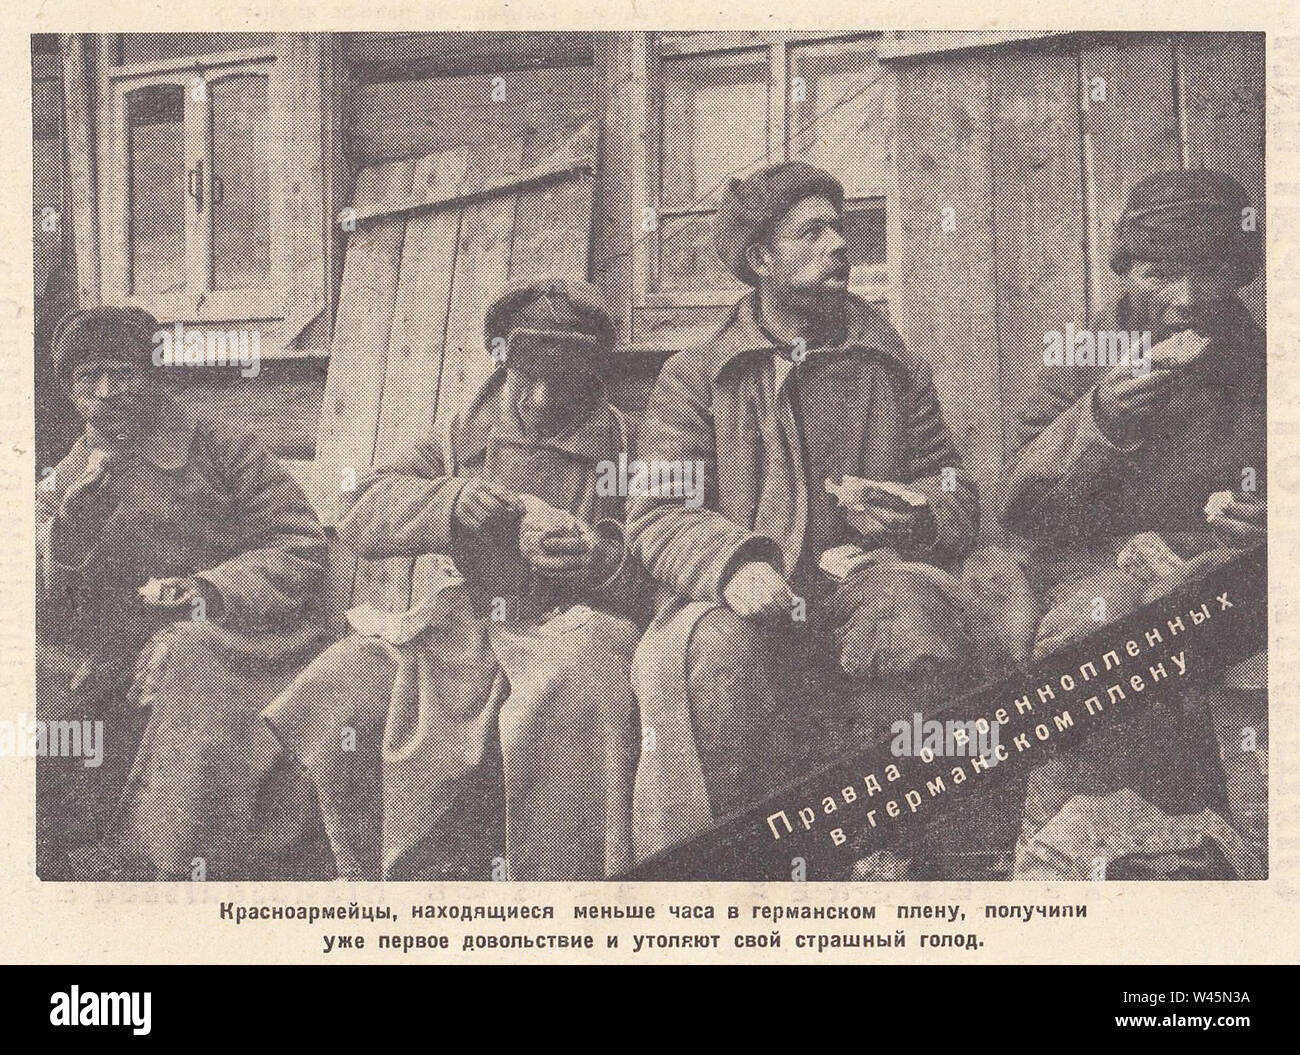 The Red Army soldiers, who were under German imprisonment for less than an hour, had already received their first allowance and satisfied their terrible hunger. The truth about prisoners of war in German captivity. Photo from the newspaper of the 1940s. Stock Photo